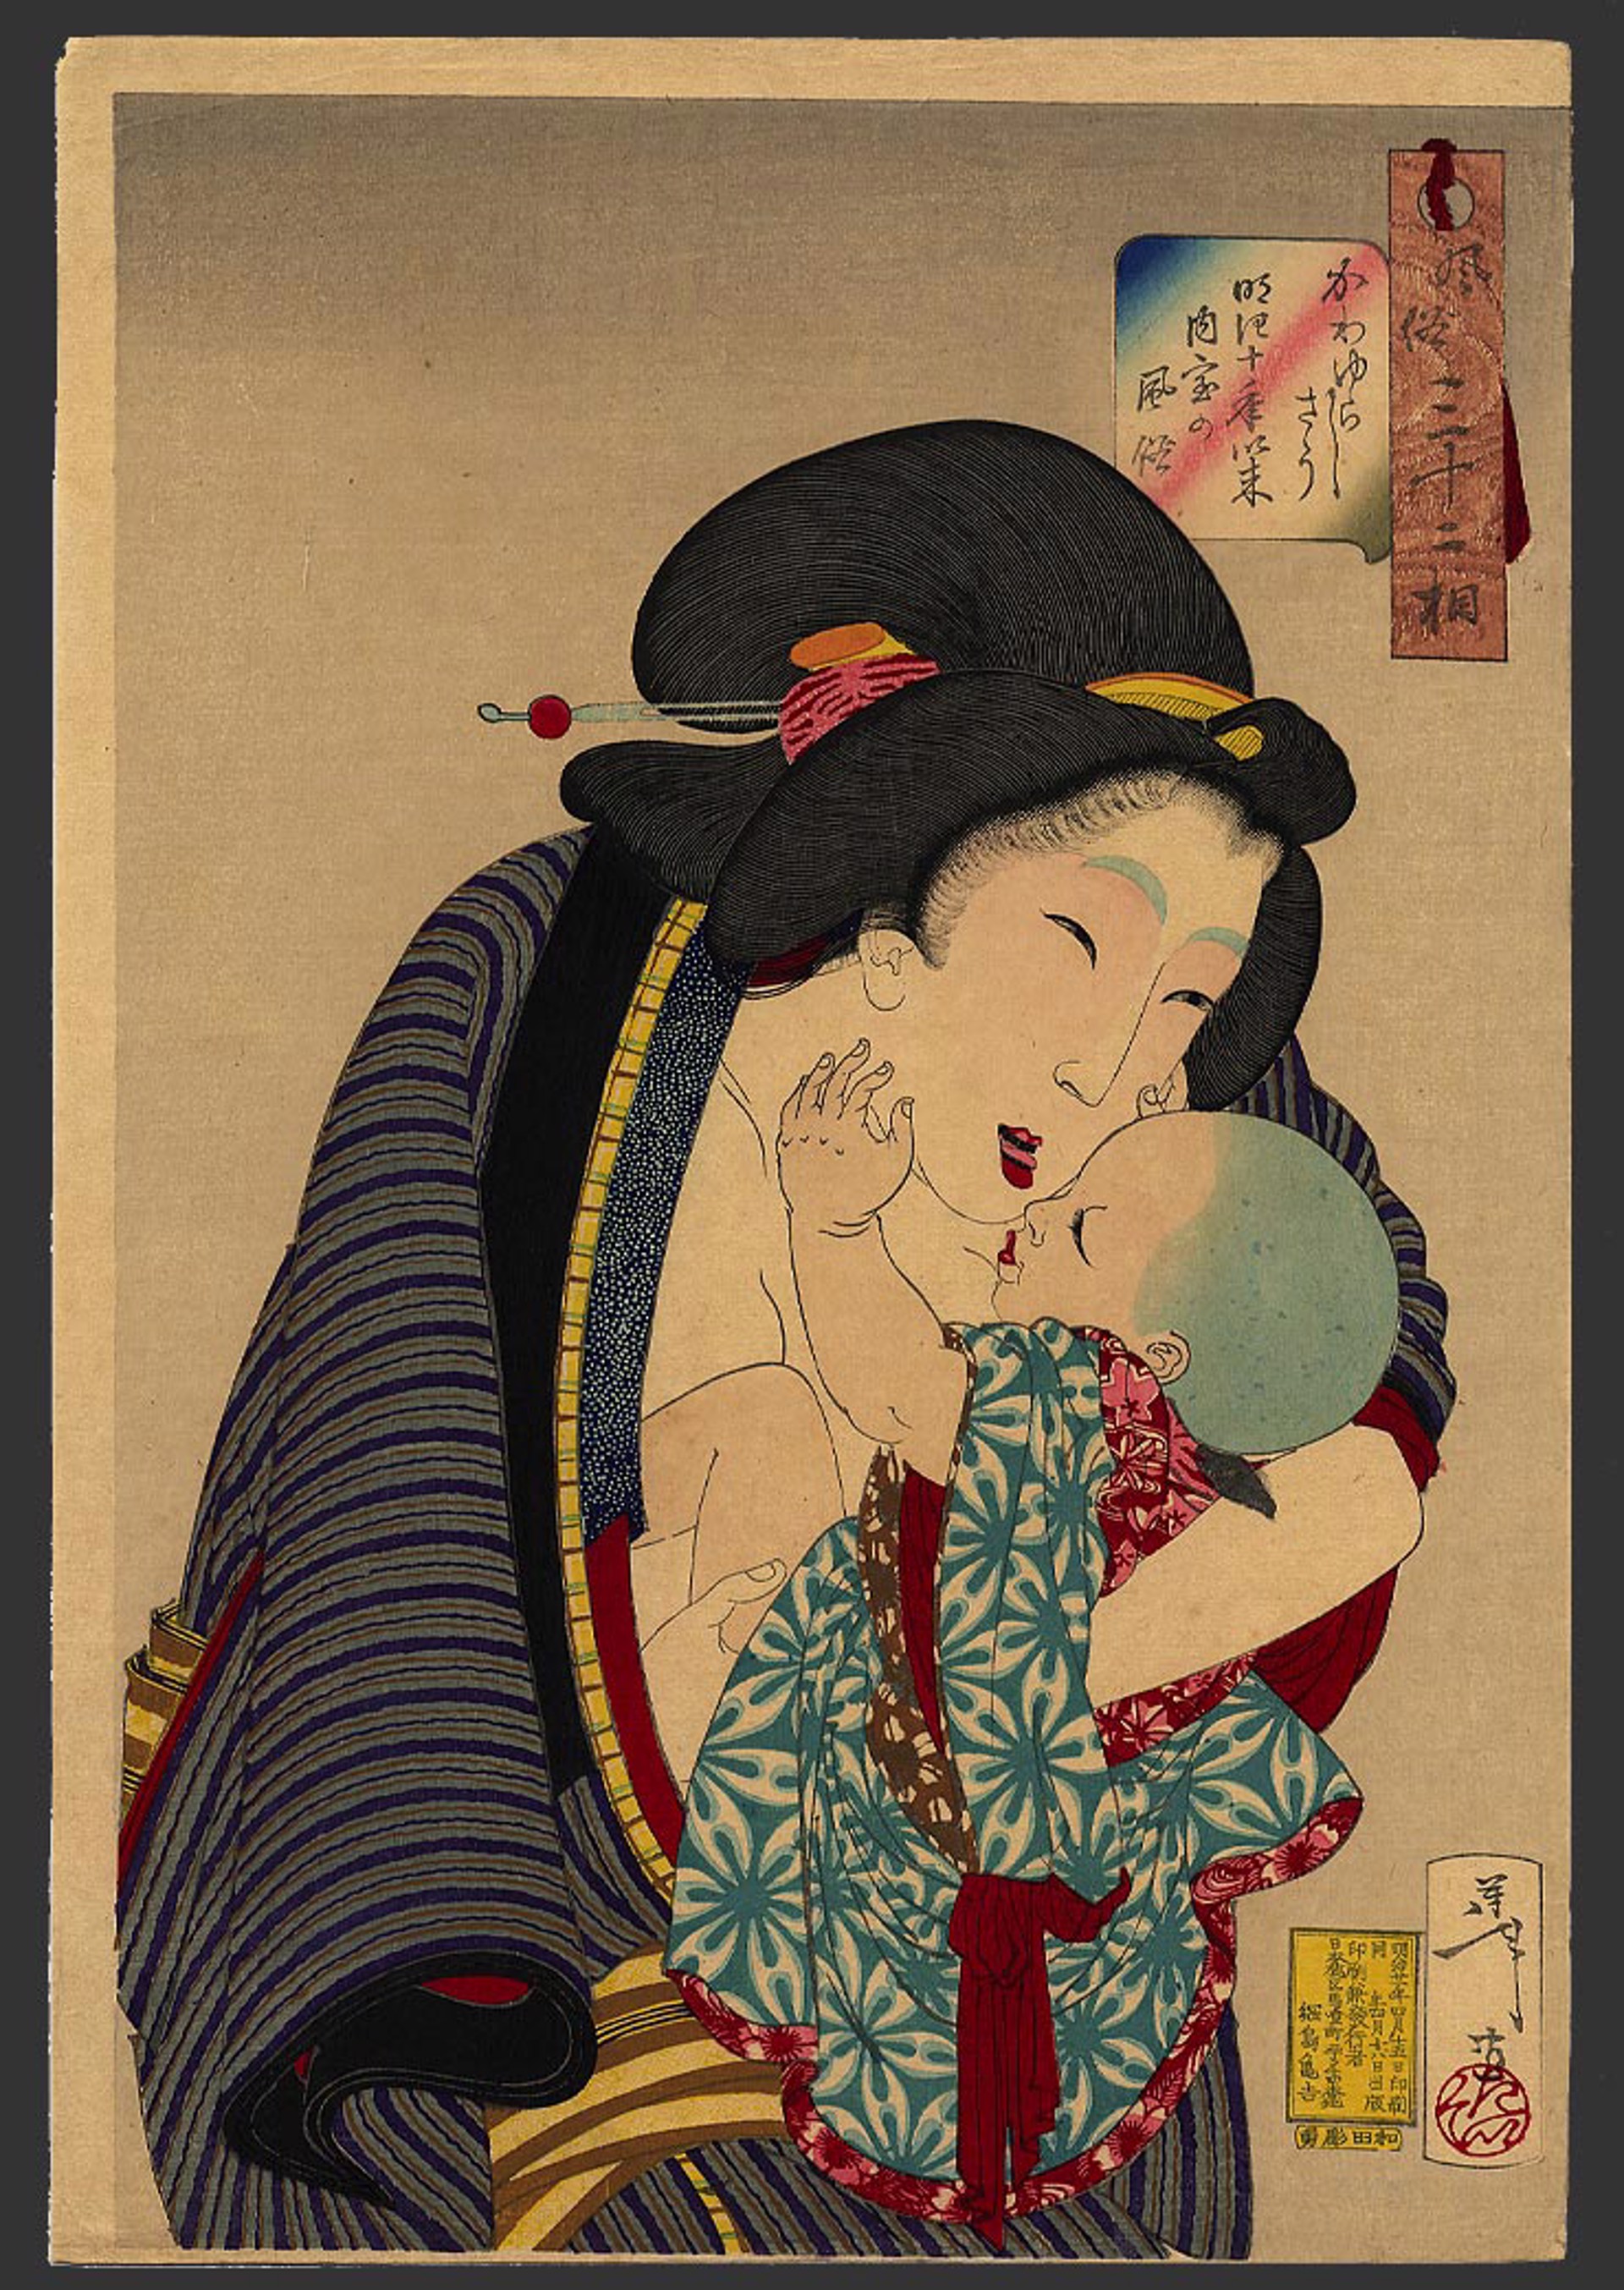 Looking Cute: The appearance of a housewife in the Meiji period 32 Aspects of Women by Yoshitoshi